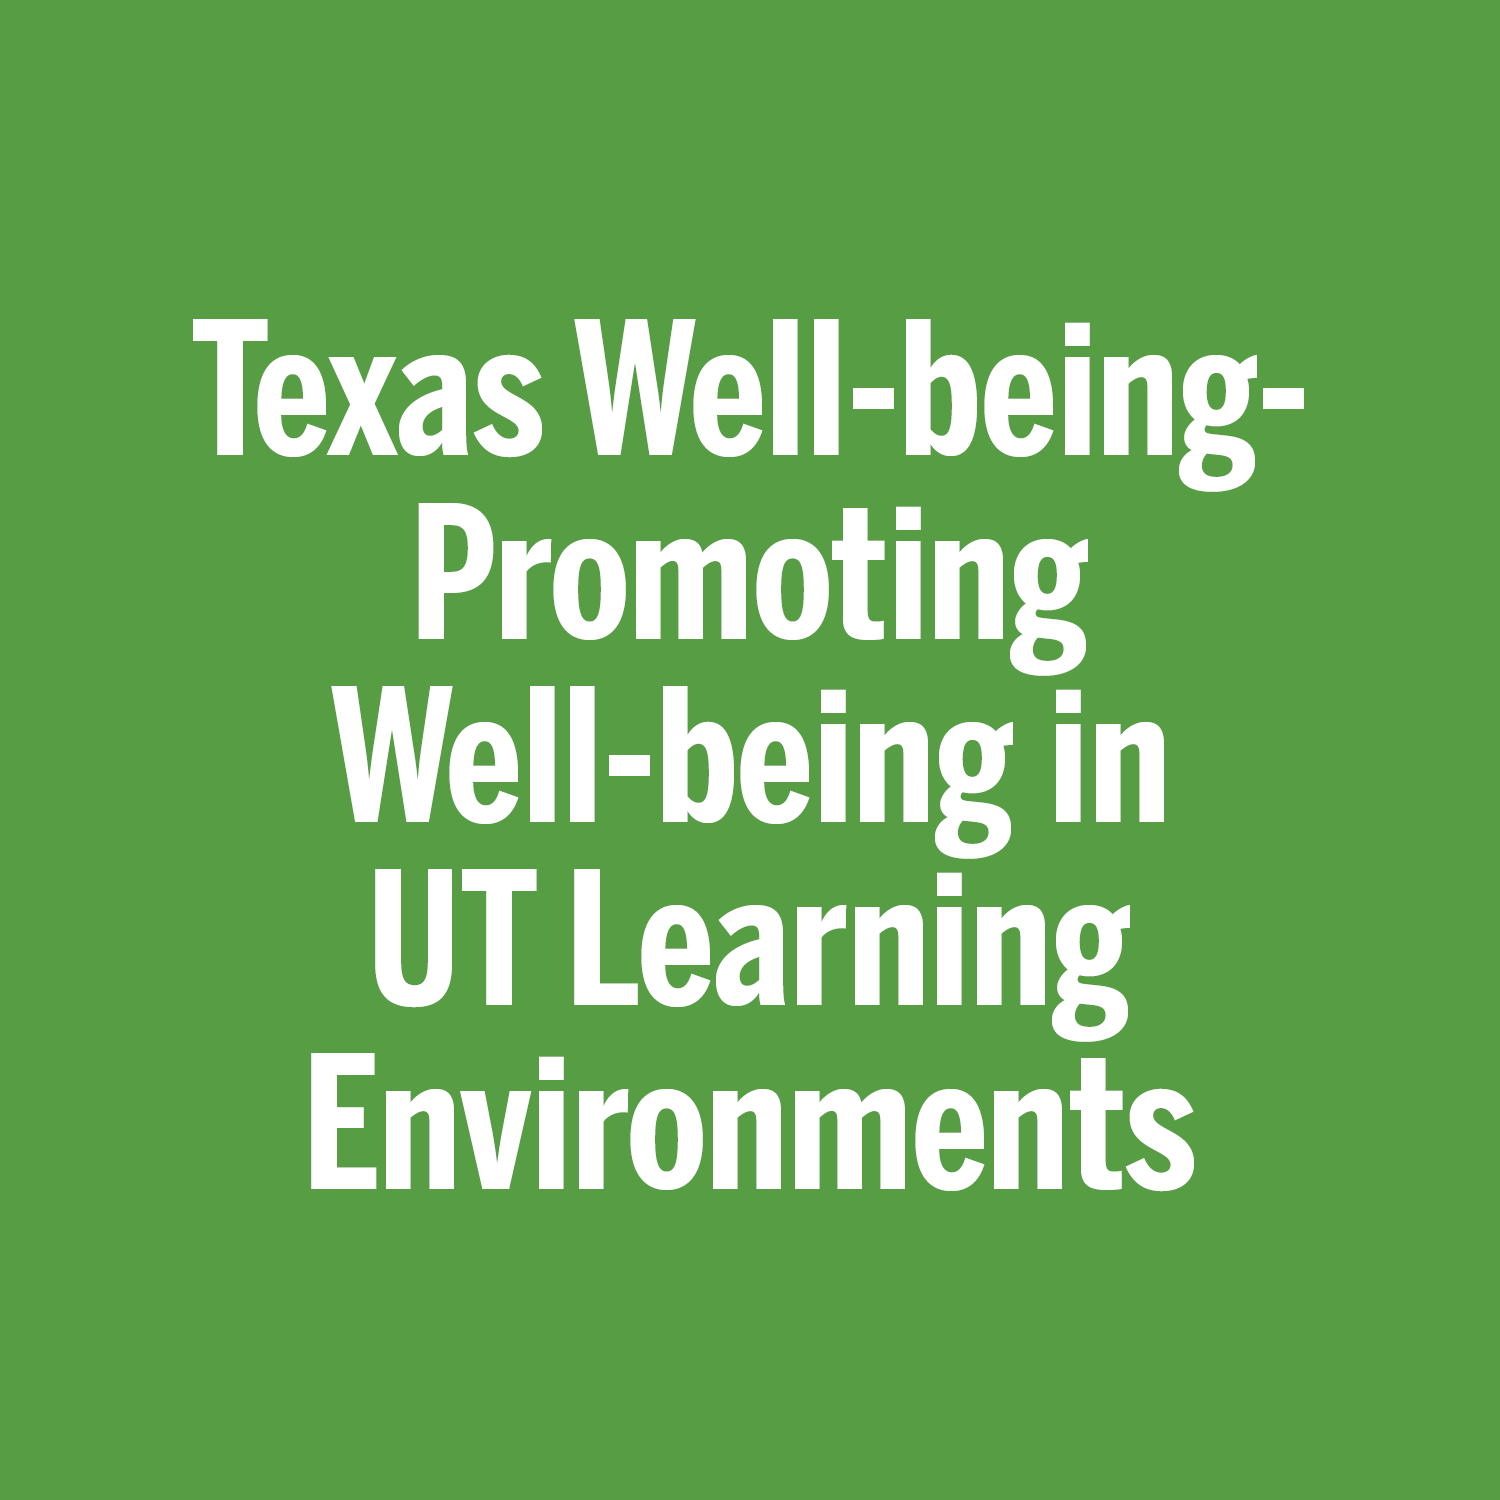 Texas Well-Being